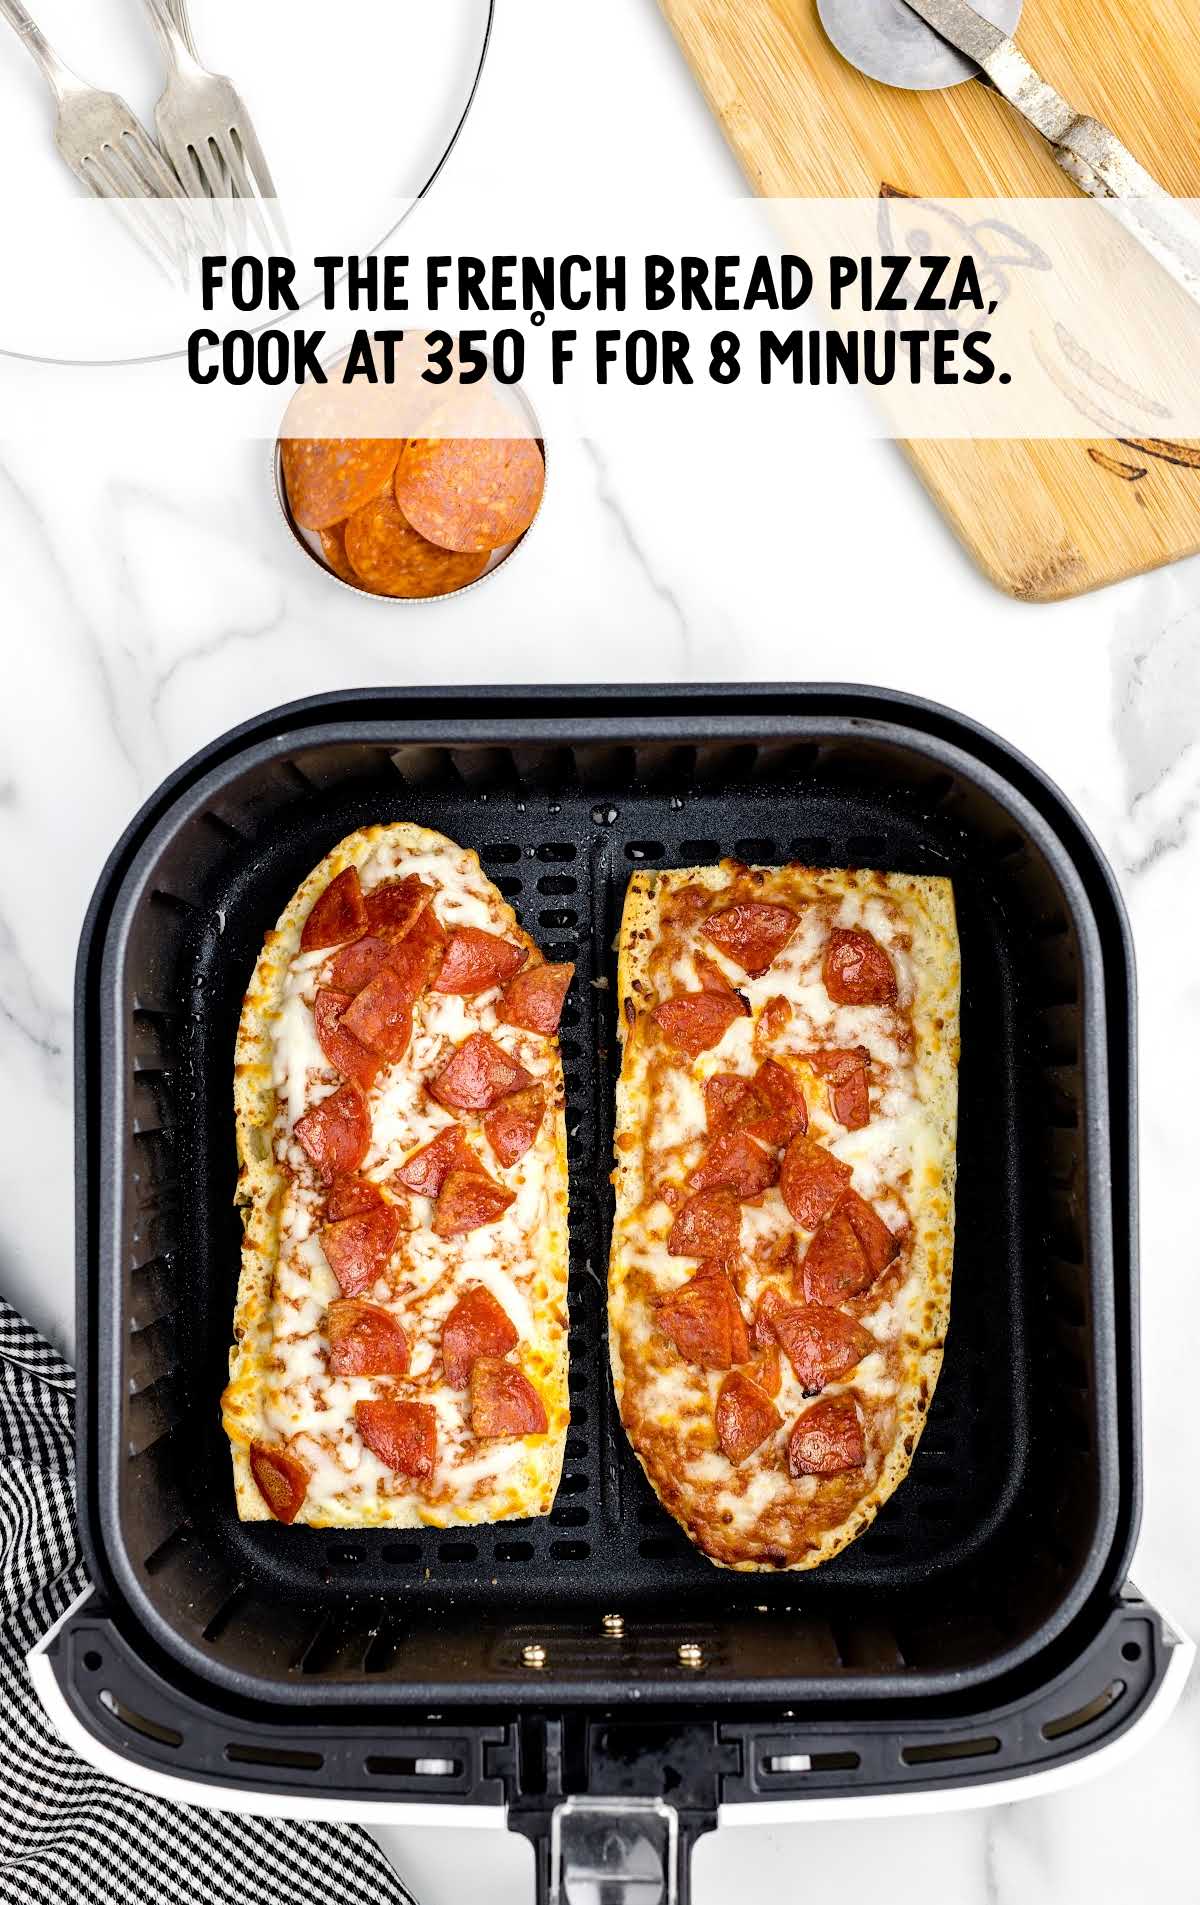 French bread pizza in an air fryer